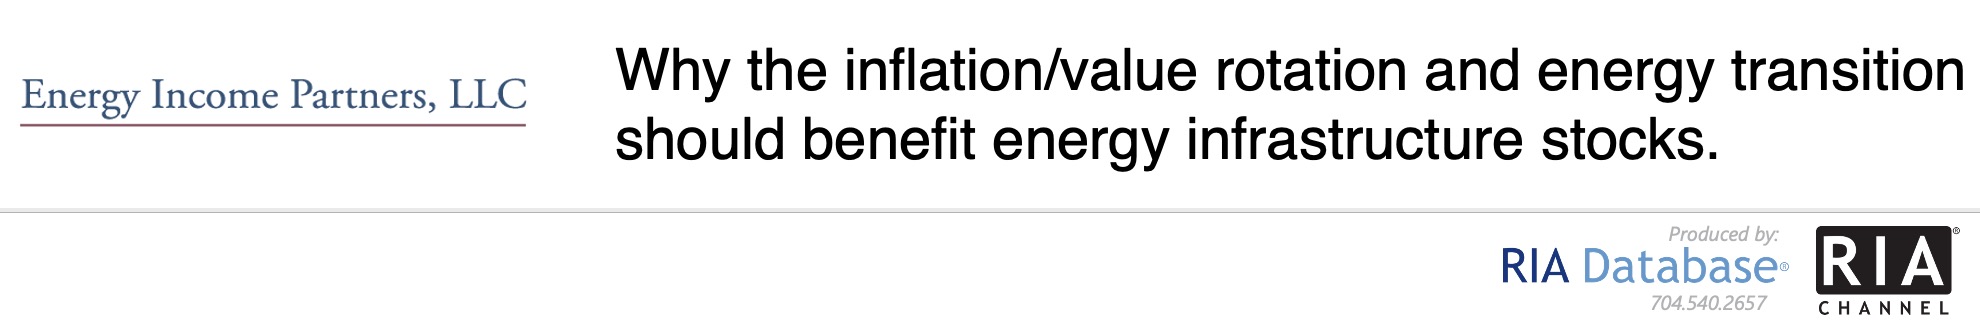 Why the inflation/value rotation and energy transition should benefit energy infrastructure stocks.